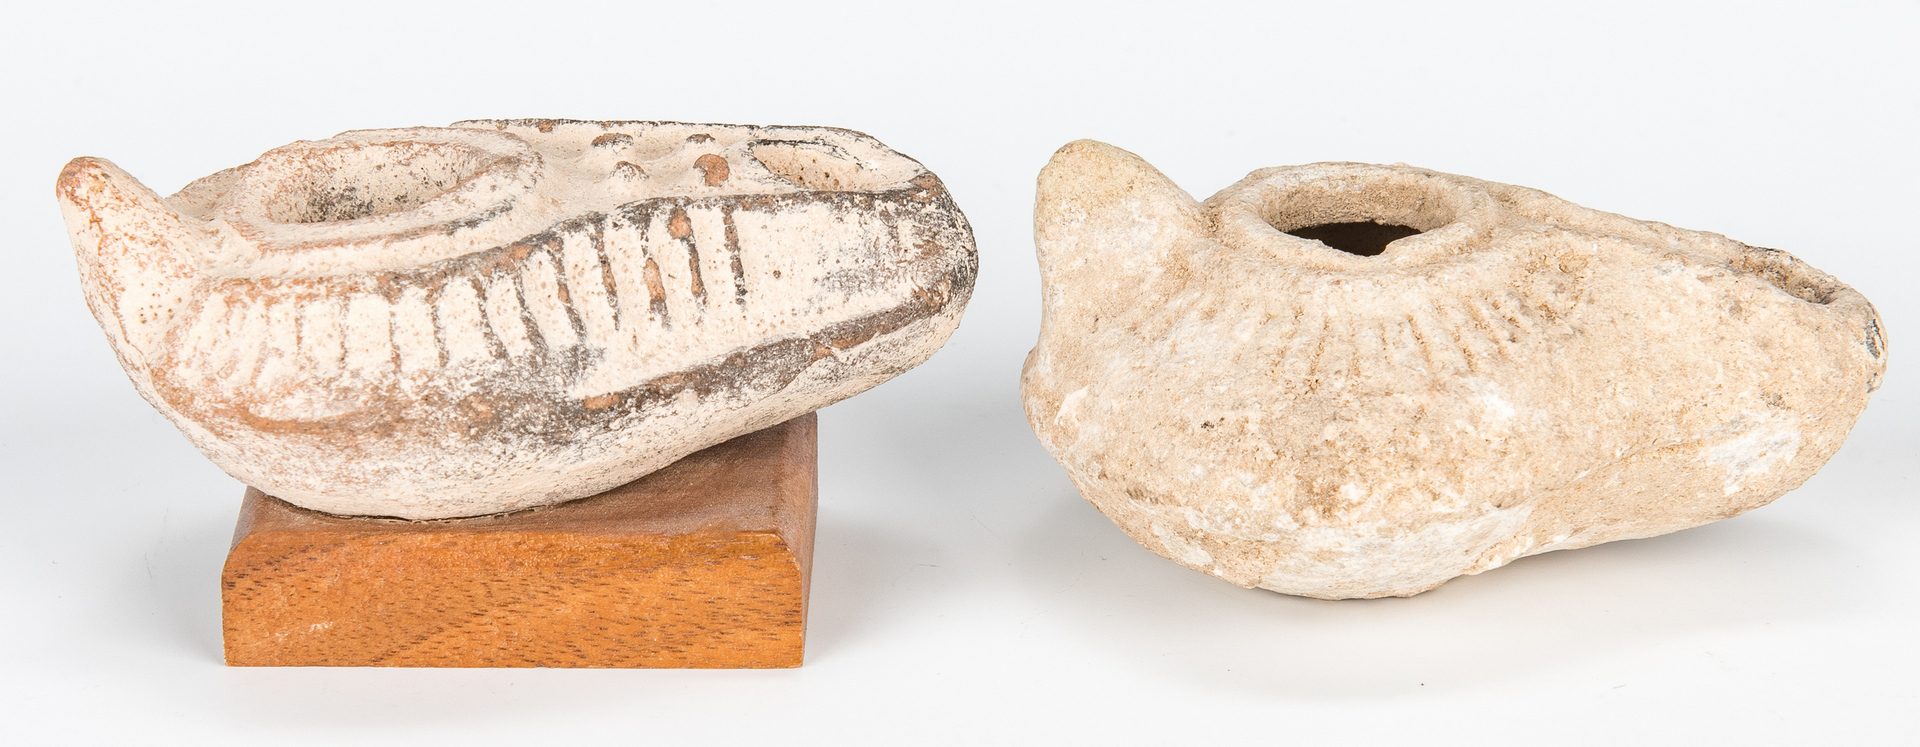 Lot 286: 8 New and Old World Items, incl. Colima Culture